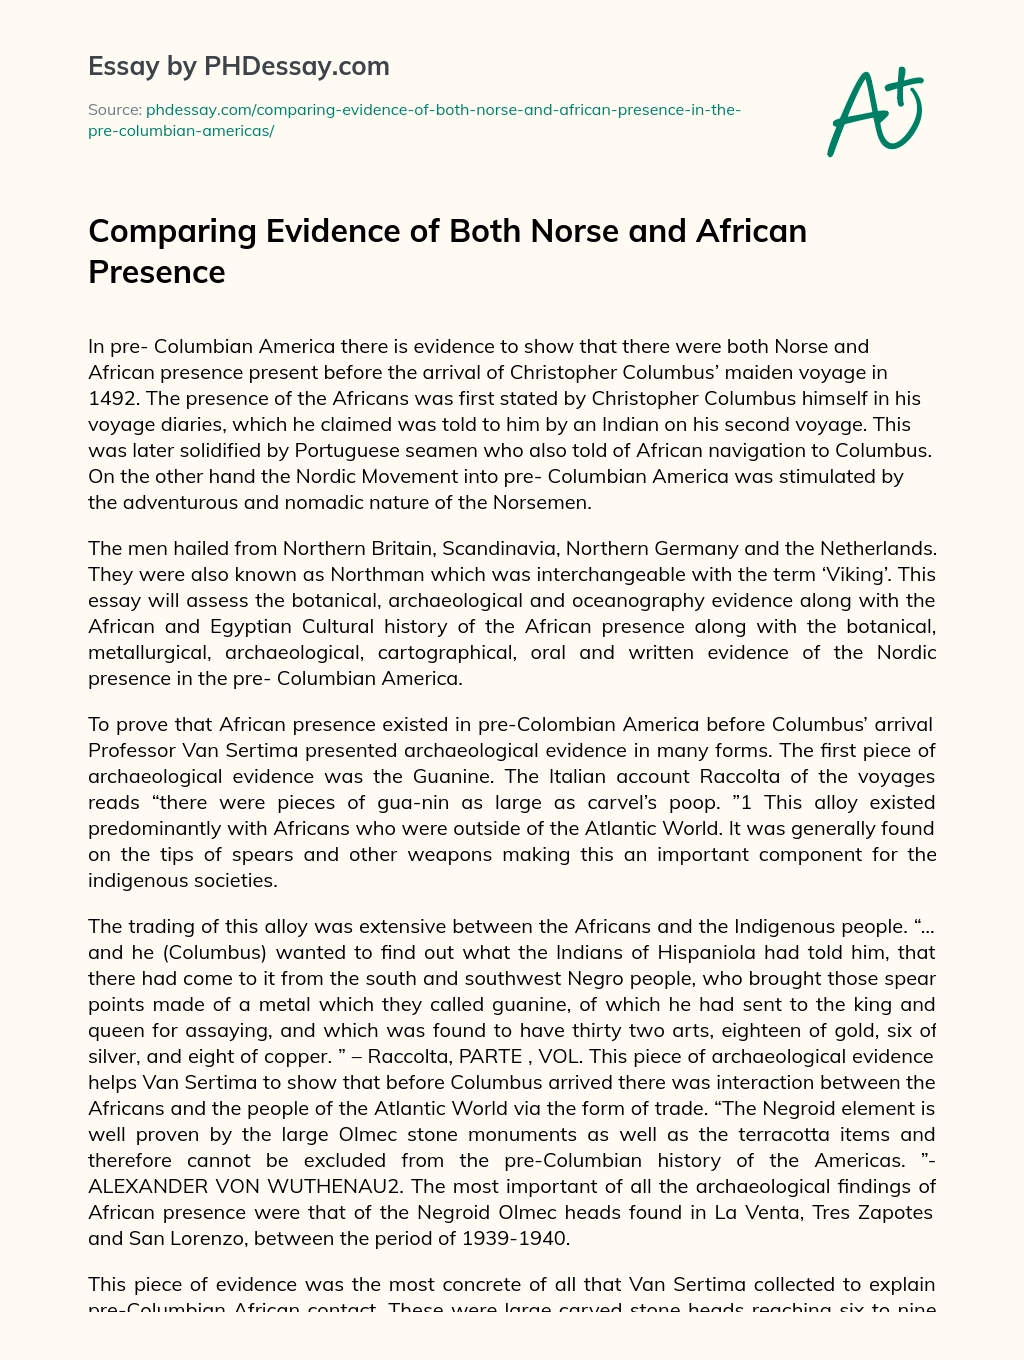 Comparing Evidence of Both Norse and African Presence essay